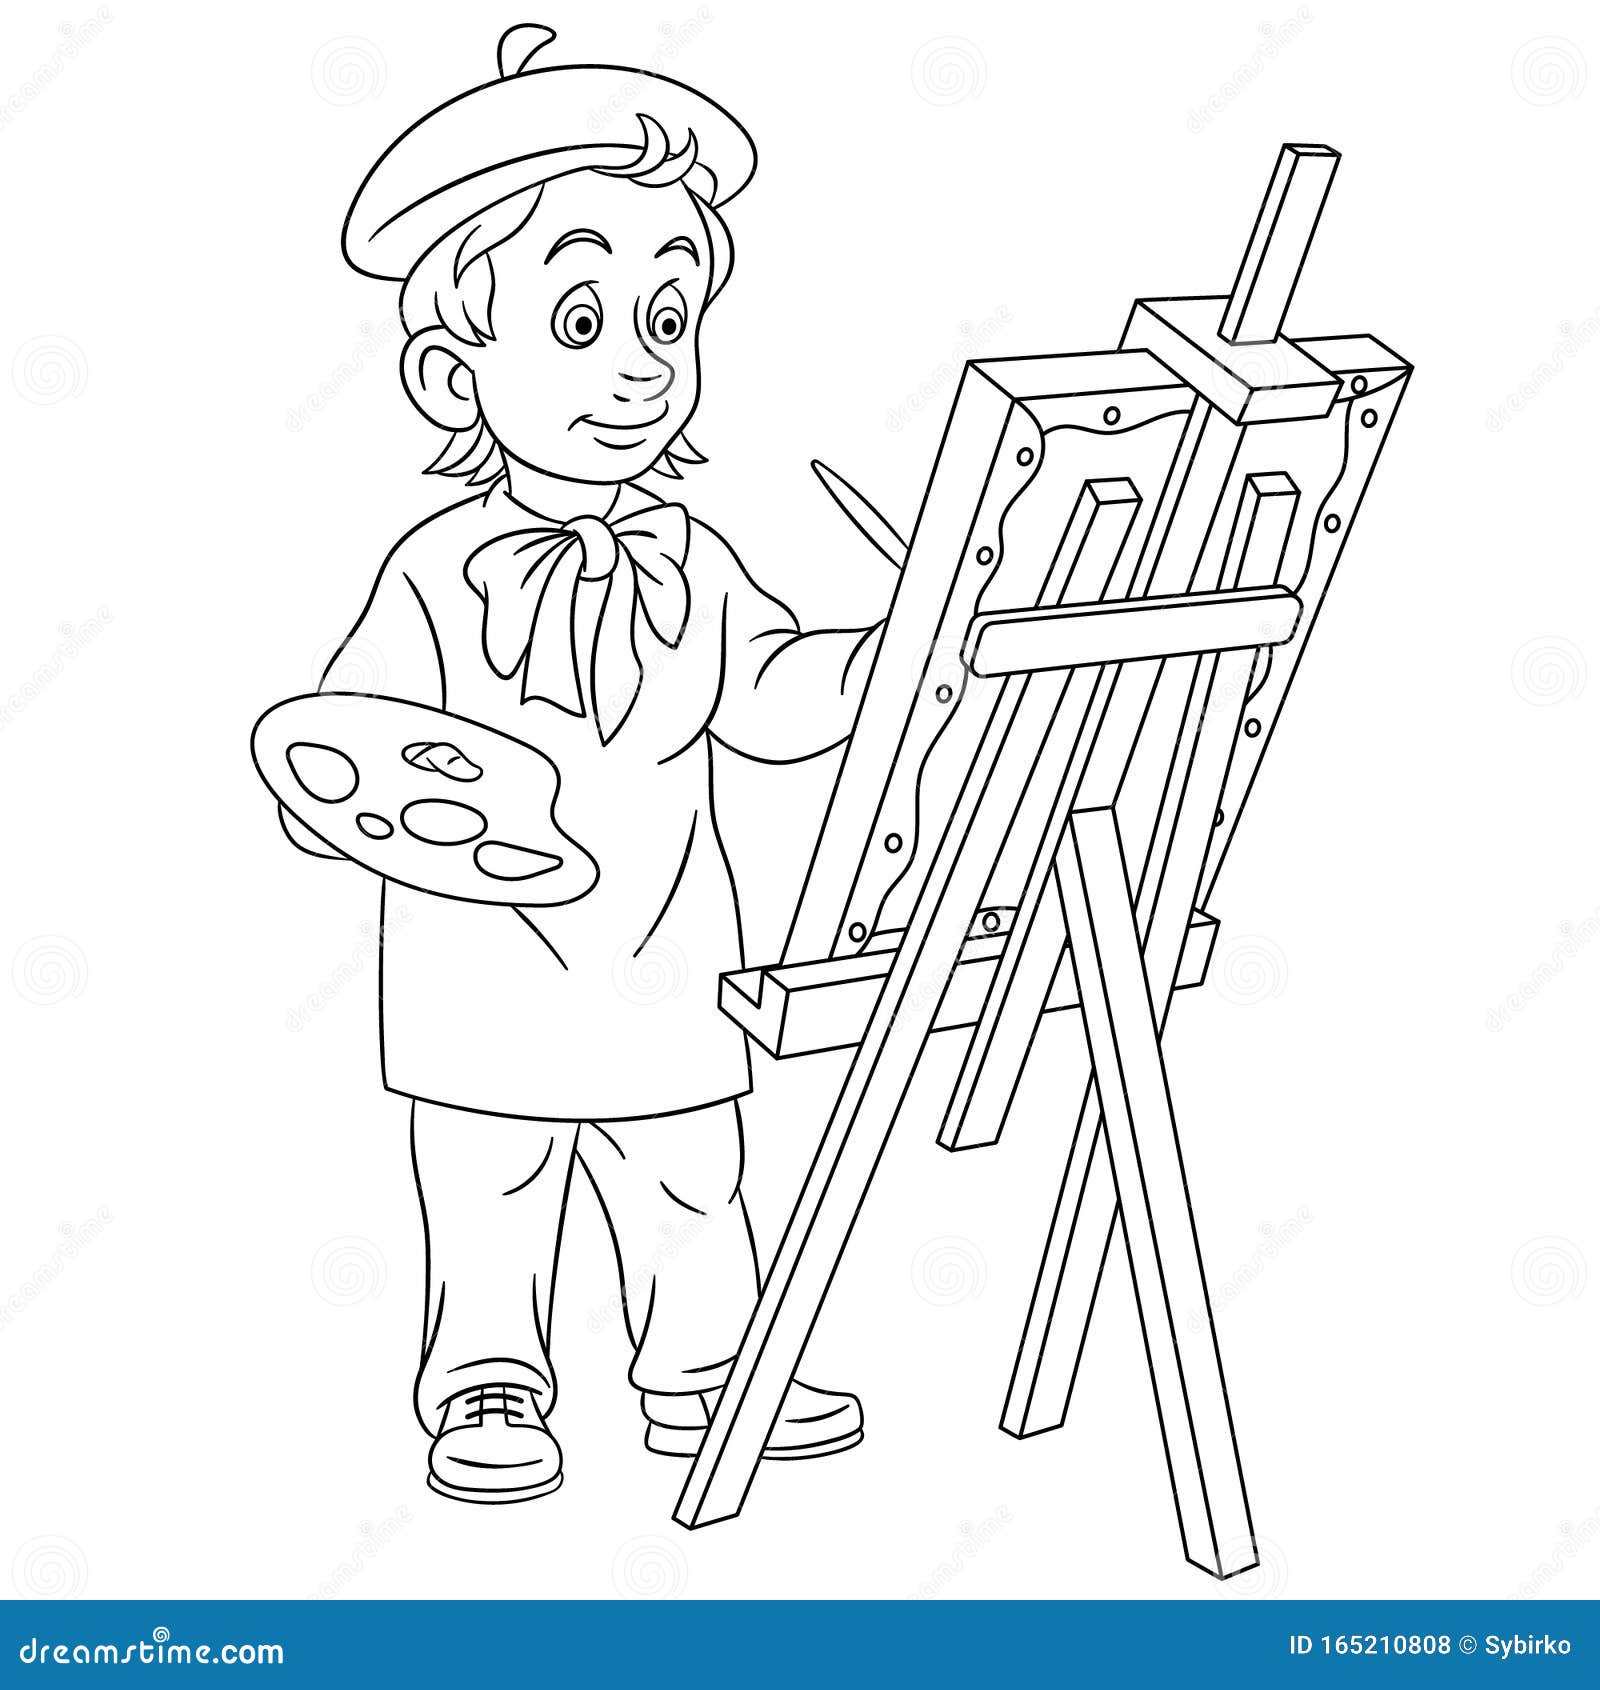 Coloring Page With Painting Artist Stock Vector Illustration Of Board Creation 165210808